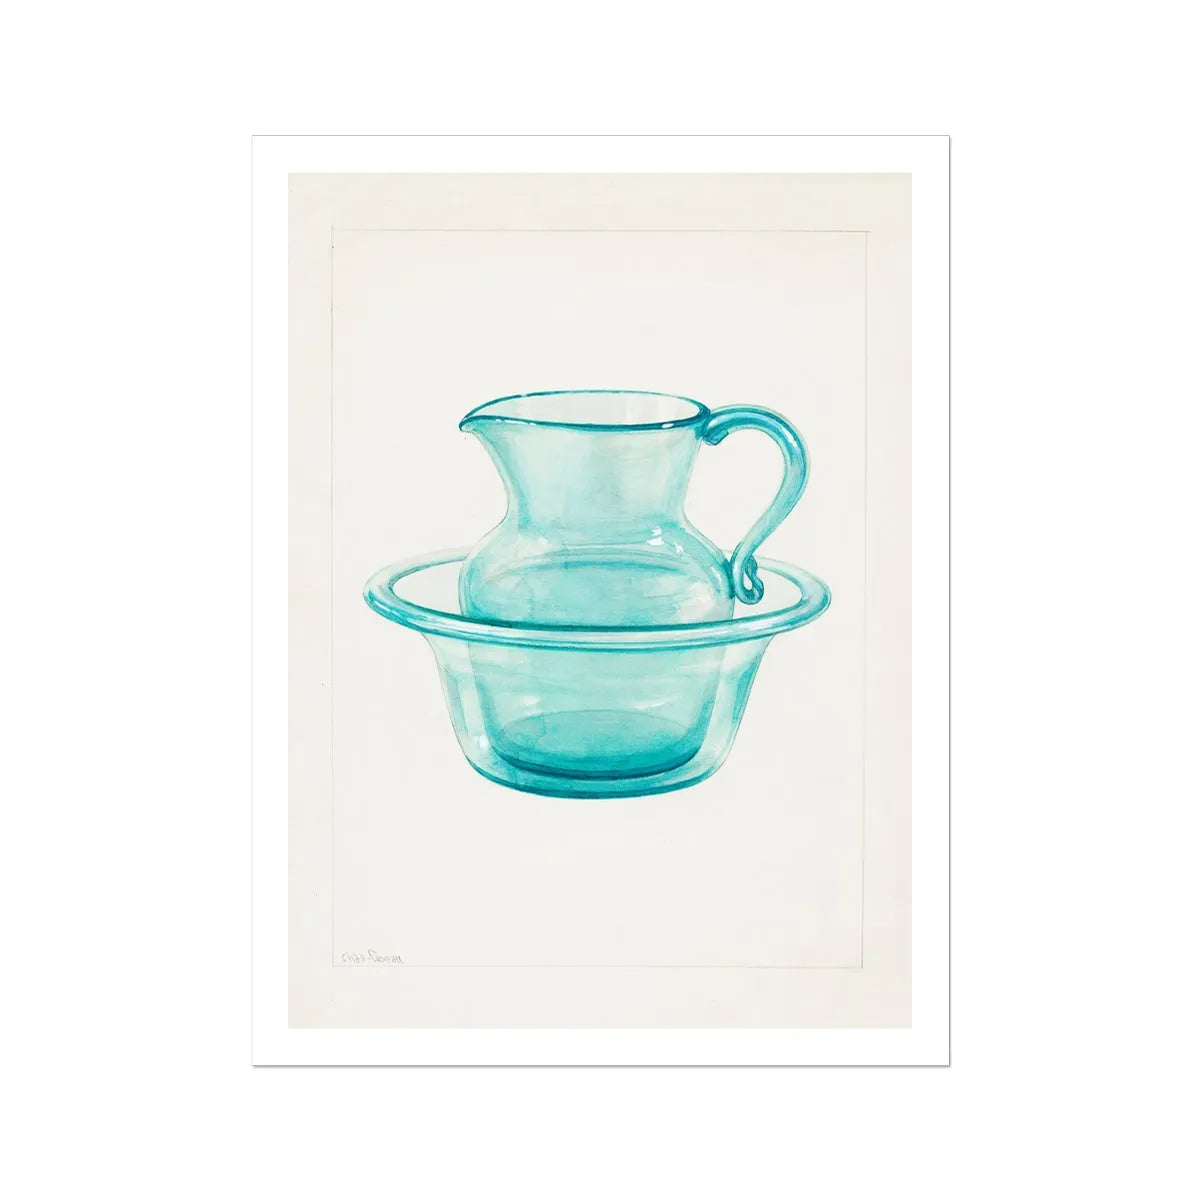 Wash Bowl And Pitcher By Charles Caseau Fine Art Print - 24’x32’ - Posters Prints & Visual Artwork - Aesthetic Art